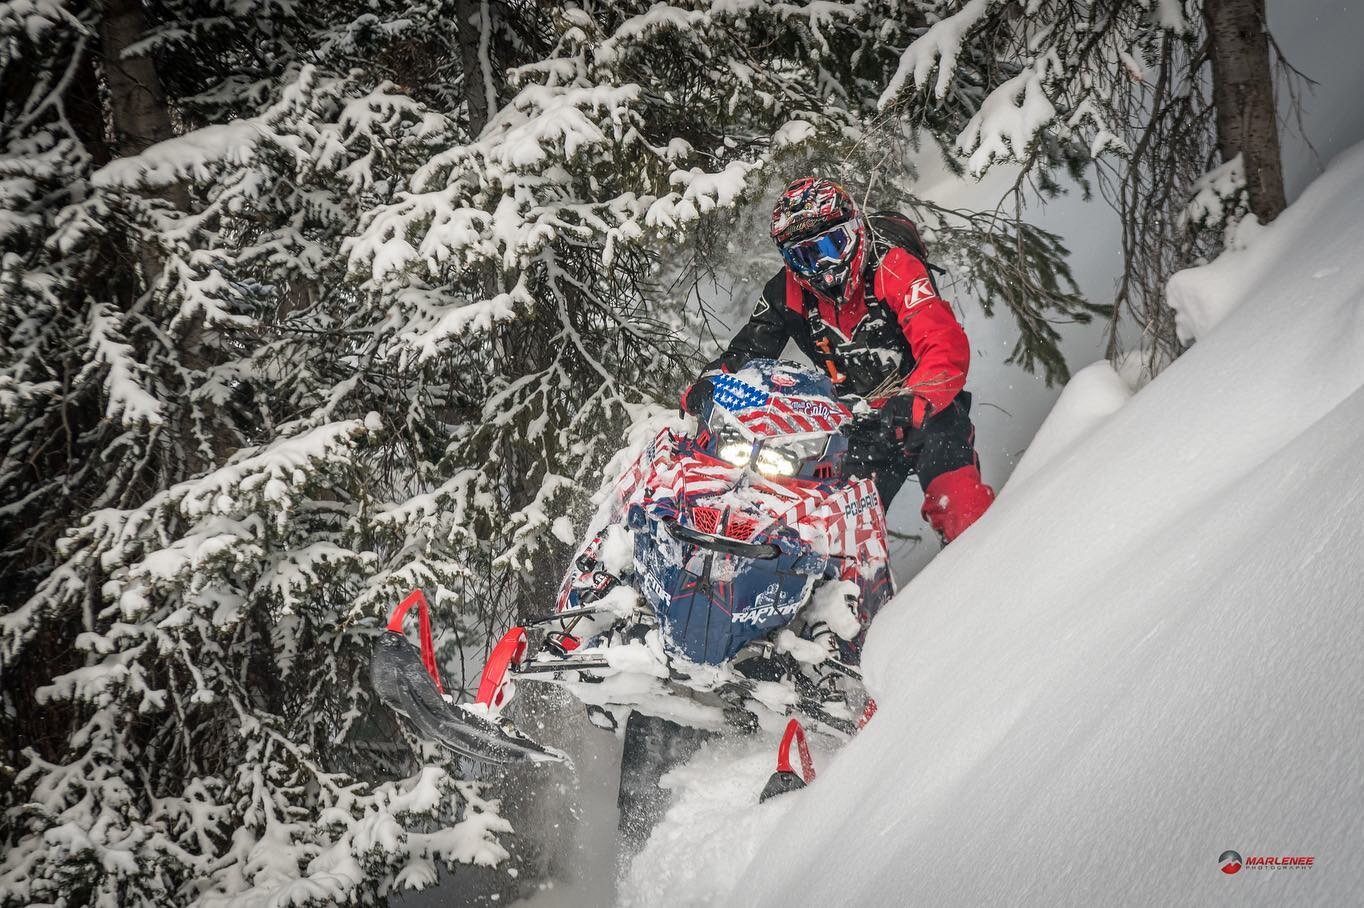 On this week's episode, we talk with Matt Entz @mattentzsnow, owner of Mountain Skillz alongside his wife Jesse in South Fork, Colorado (Wolf Creek). Matt specializes in off-trail technical mountain snowmobiling instruction and motorized avalanche ed